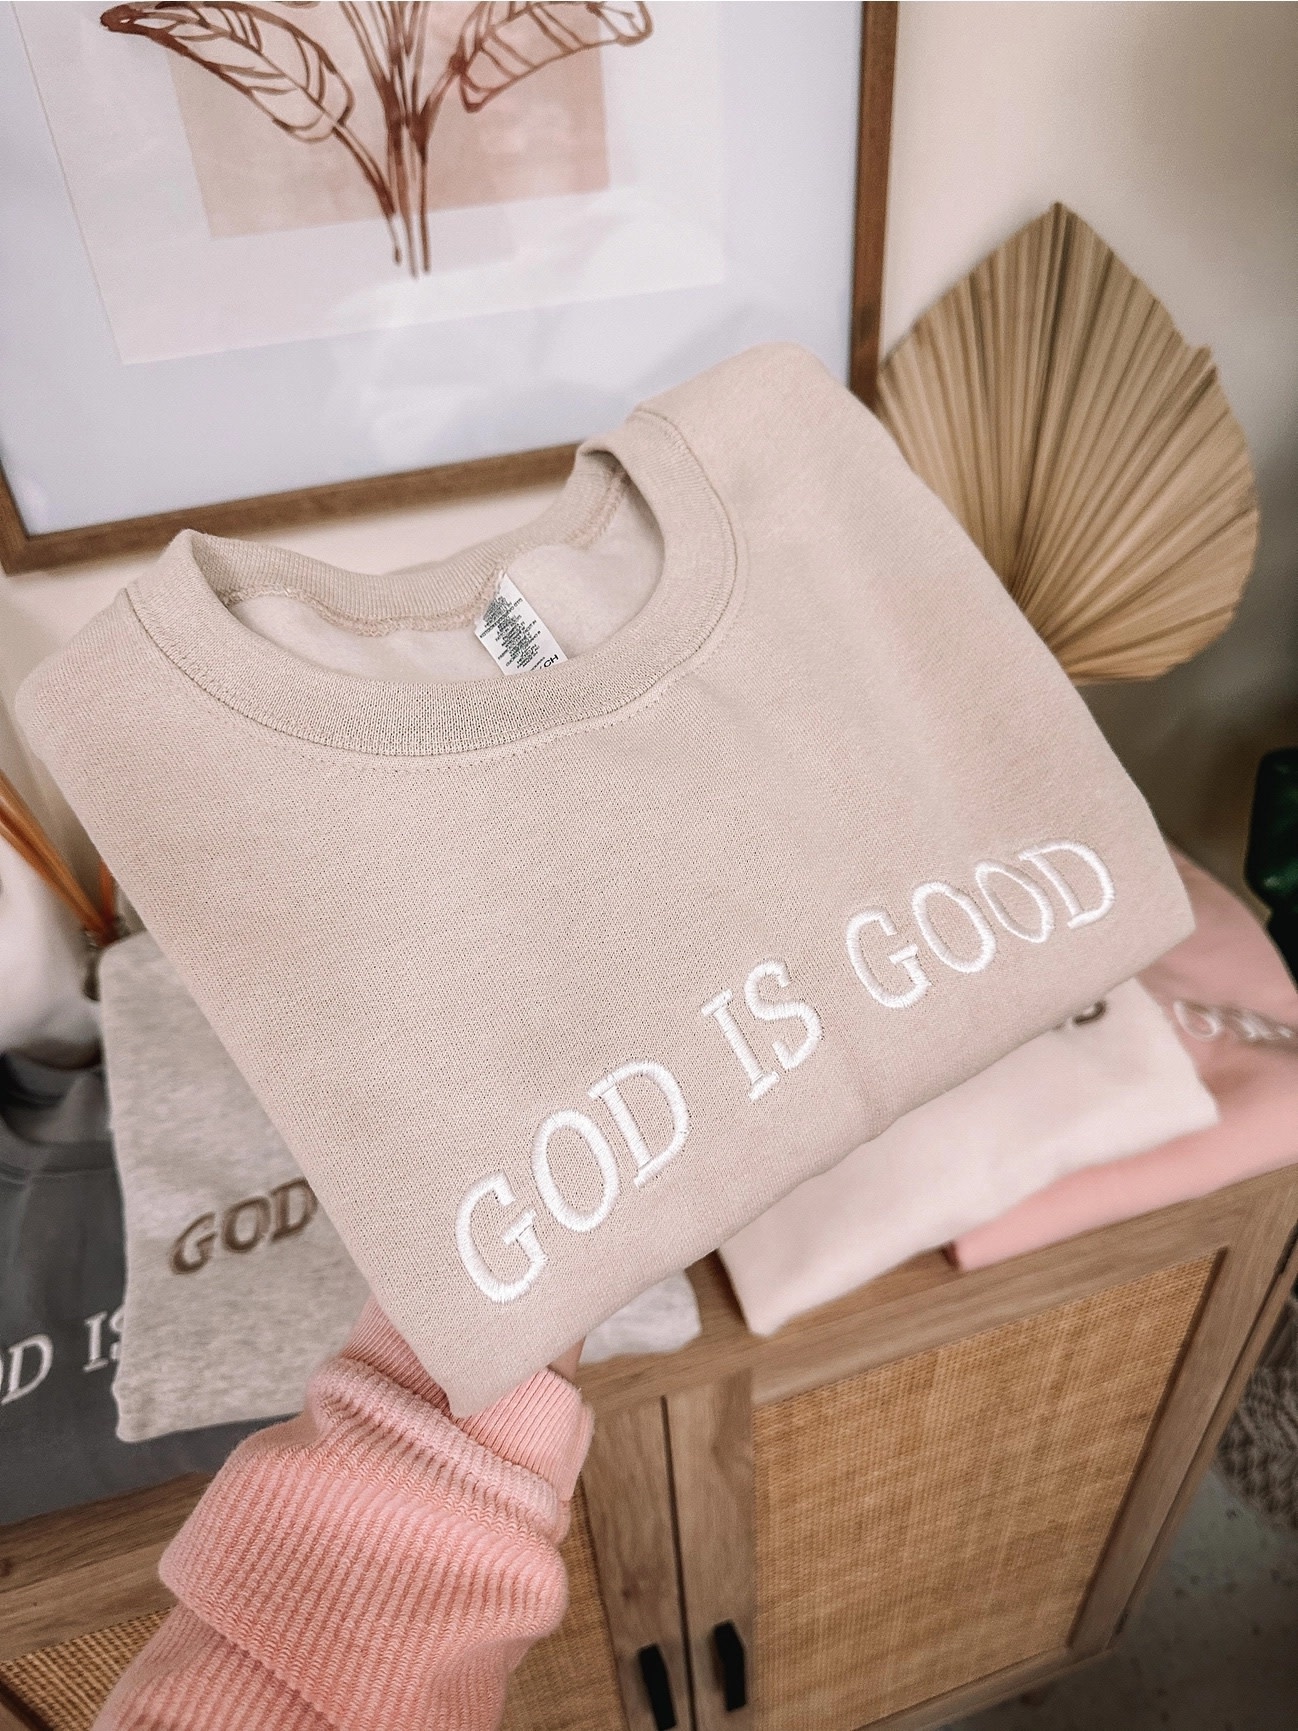 God is Good All the Time  Comfort Colors Sweatshirt – olive and ivory